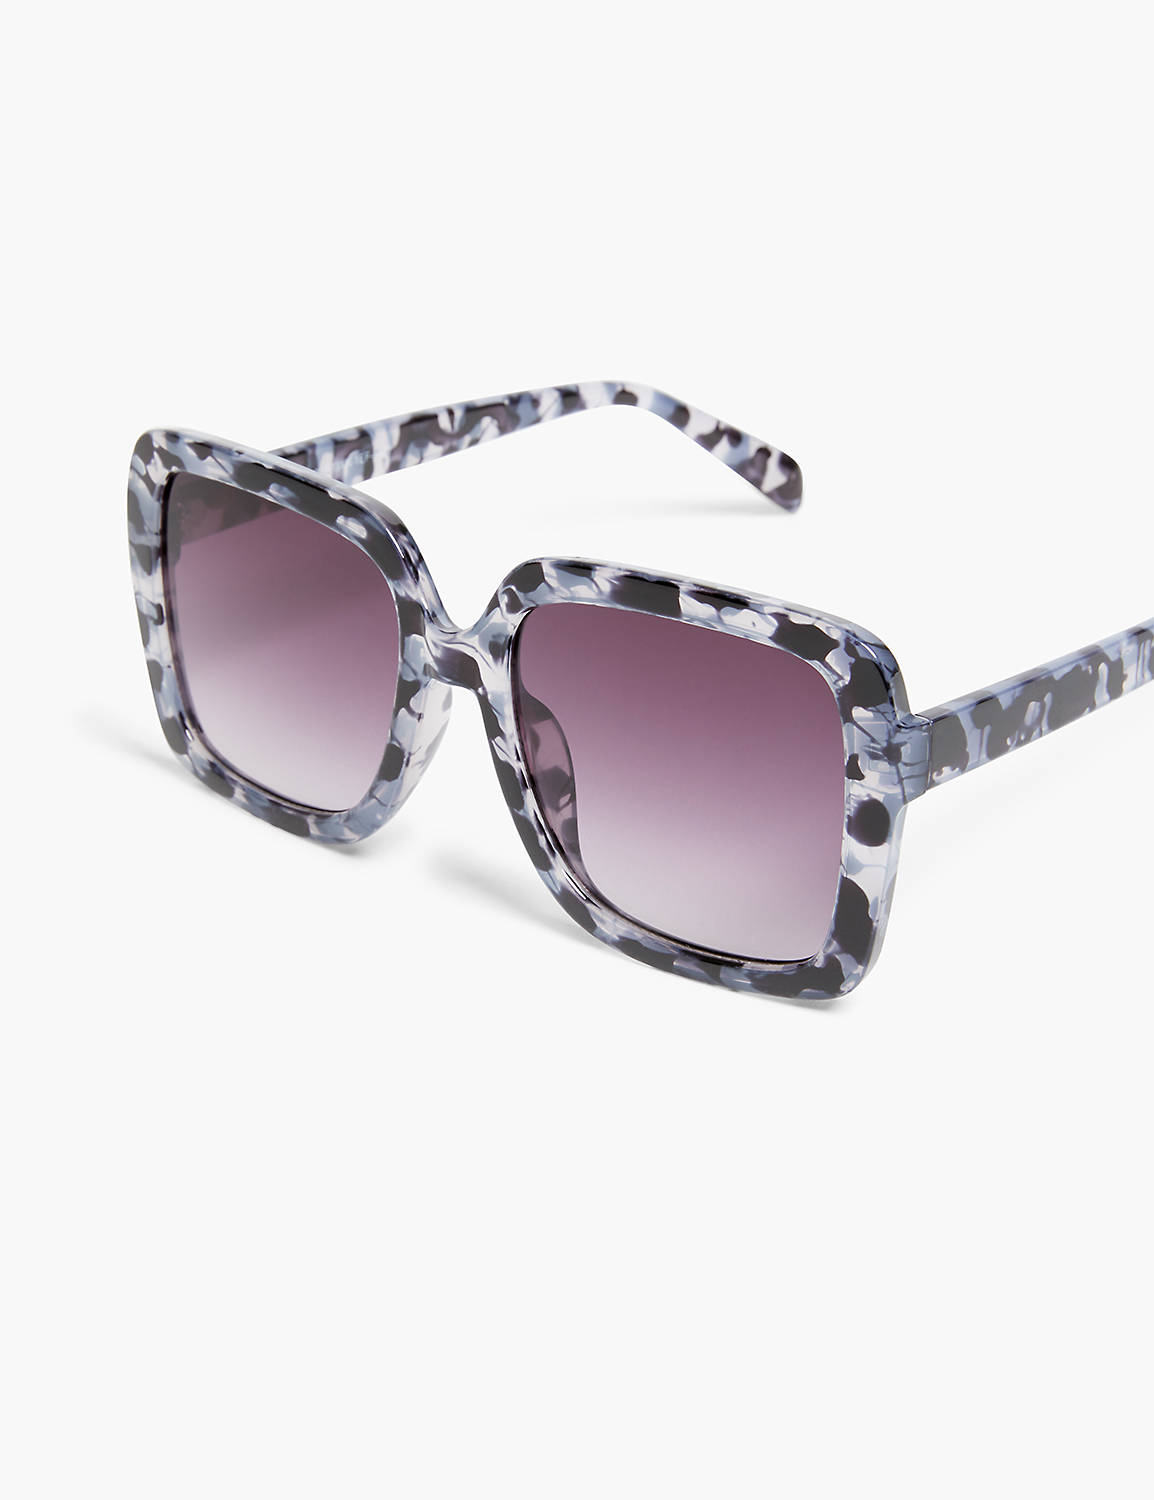 Black and Grey Tort Square Sunglass Product Image 1